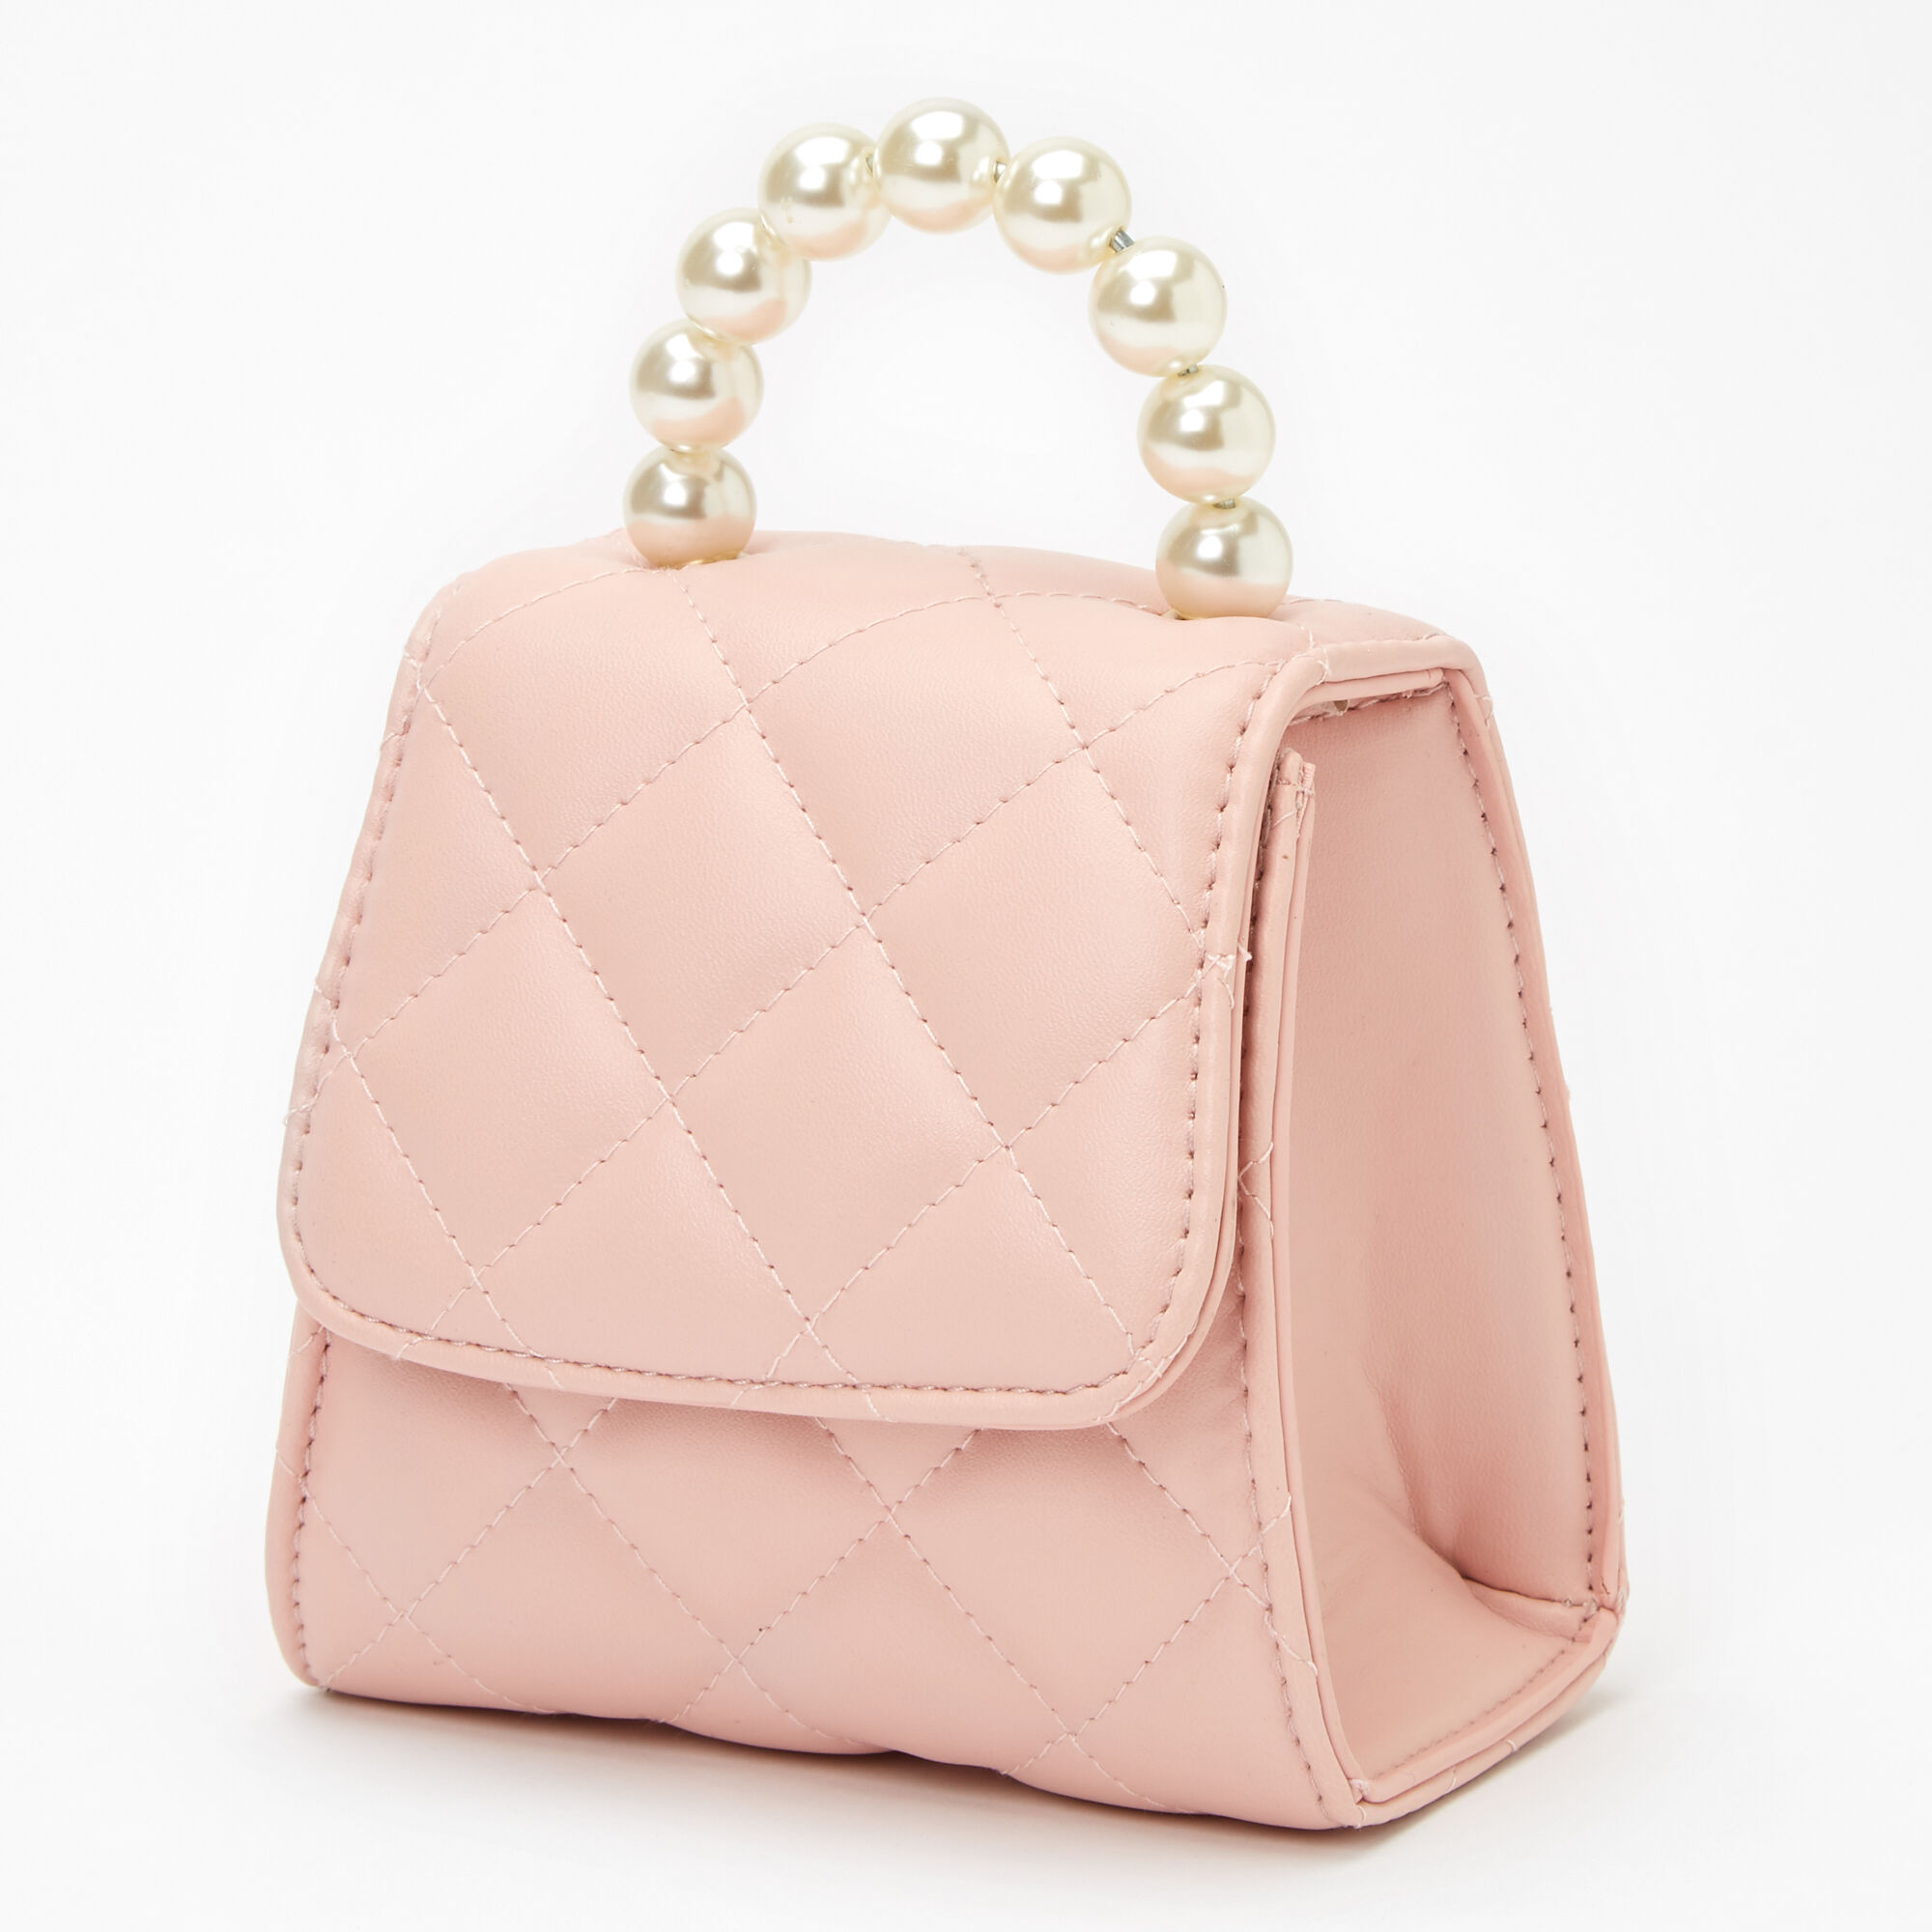 Pearl bag leather crossbody bag Chanel Pink in Leather - 33202592